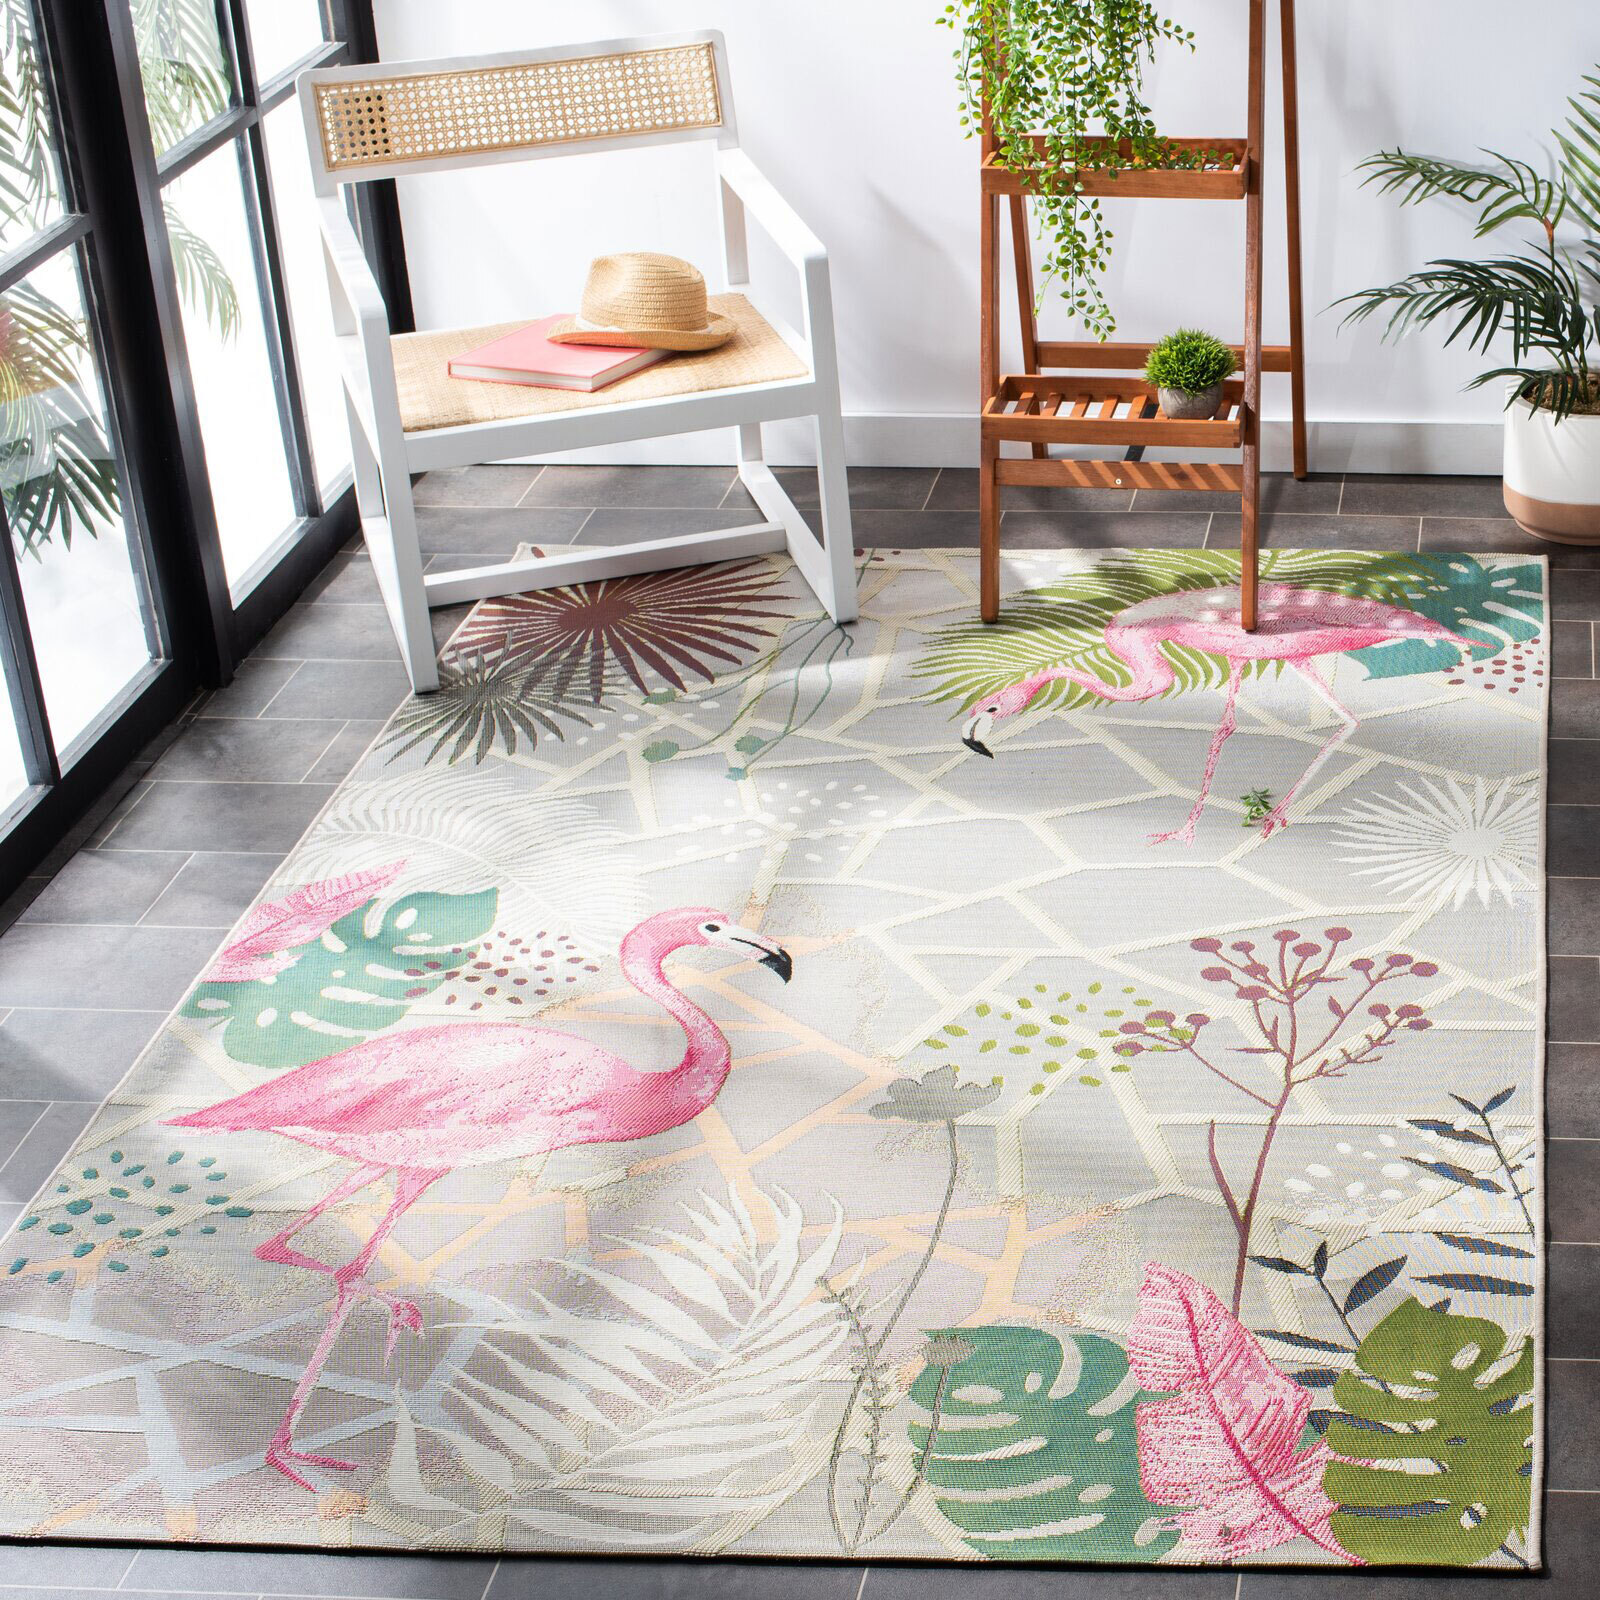 Sole Flamingo Tropical Picture Rug